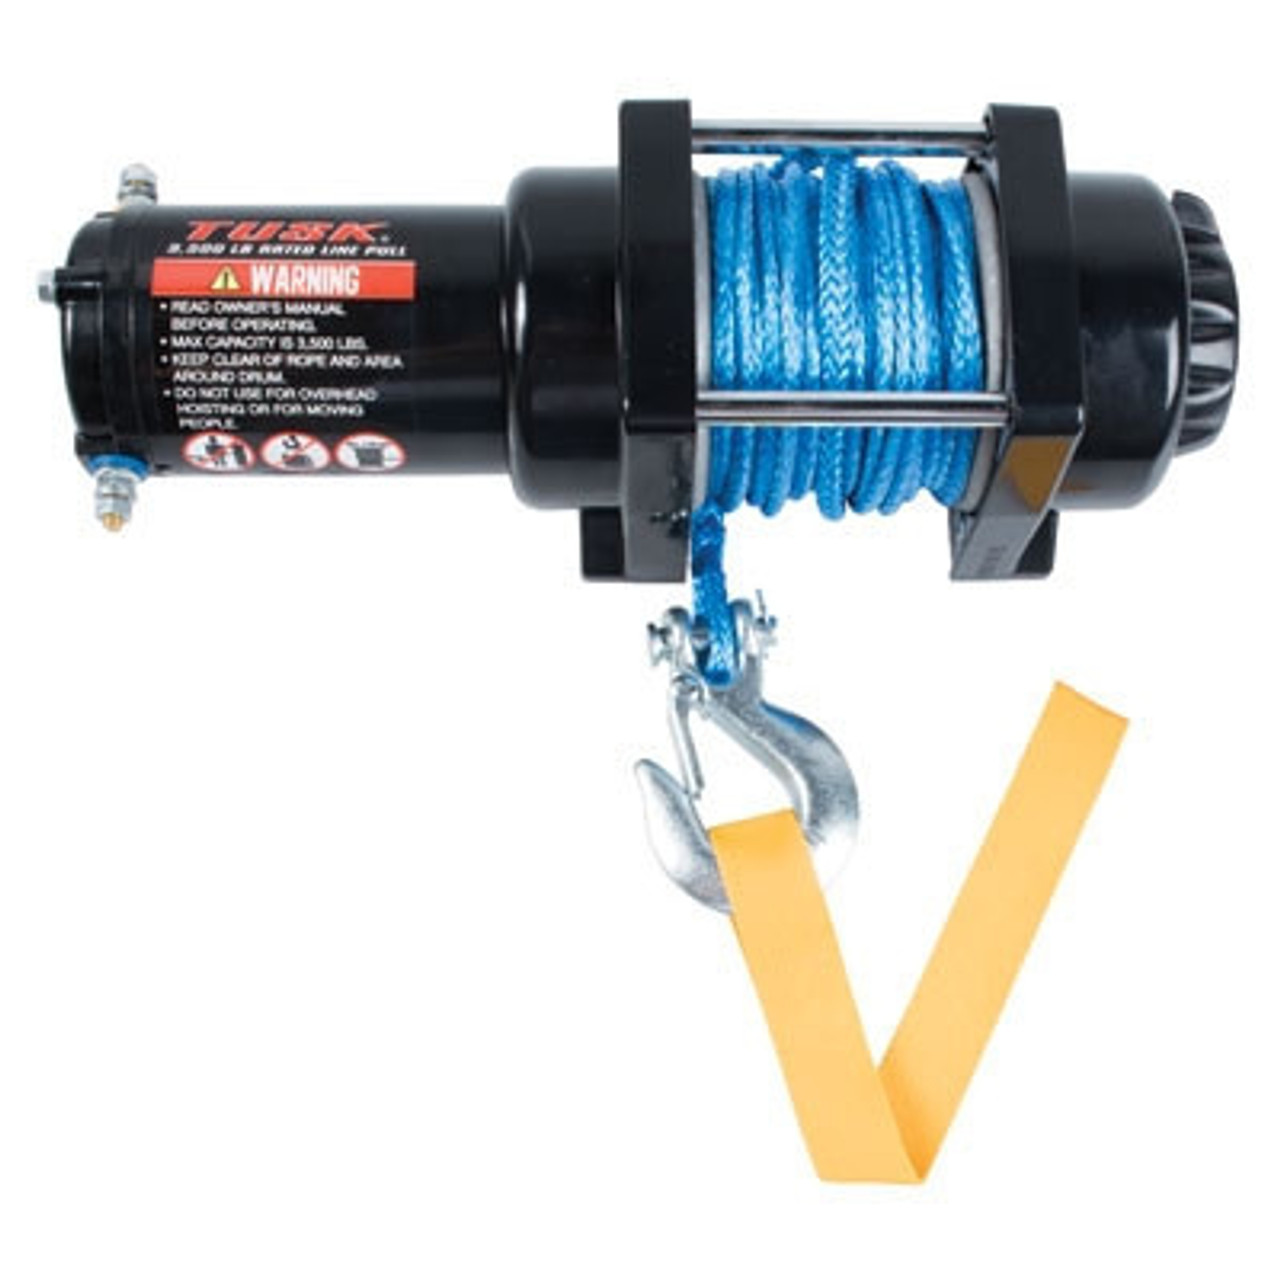 Polaris RZR 3500 lb Winch with Synthetic Rope by Tusk